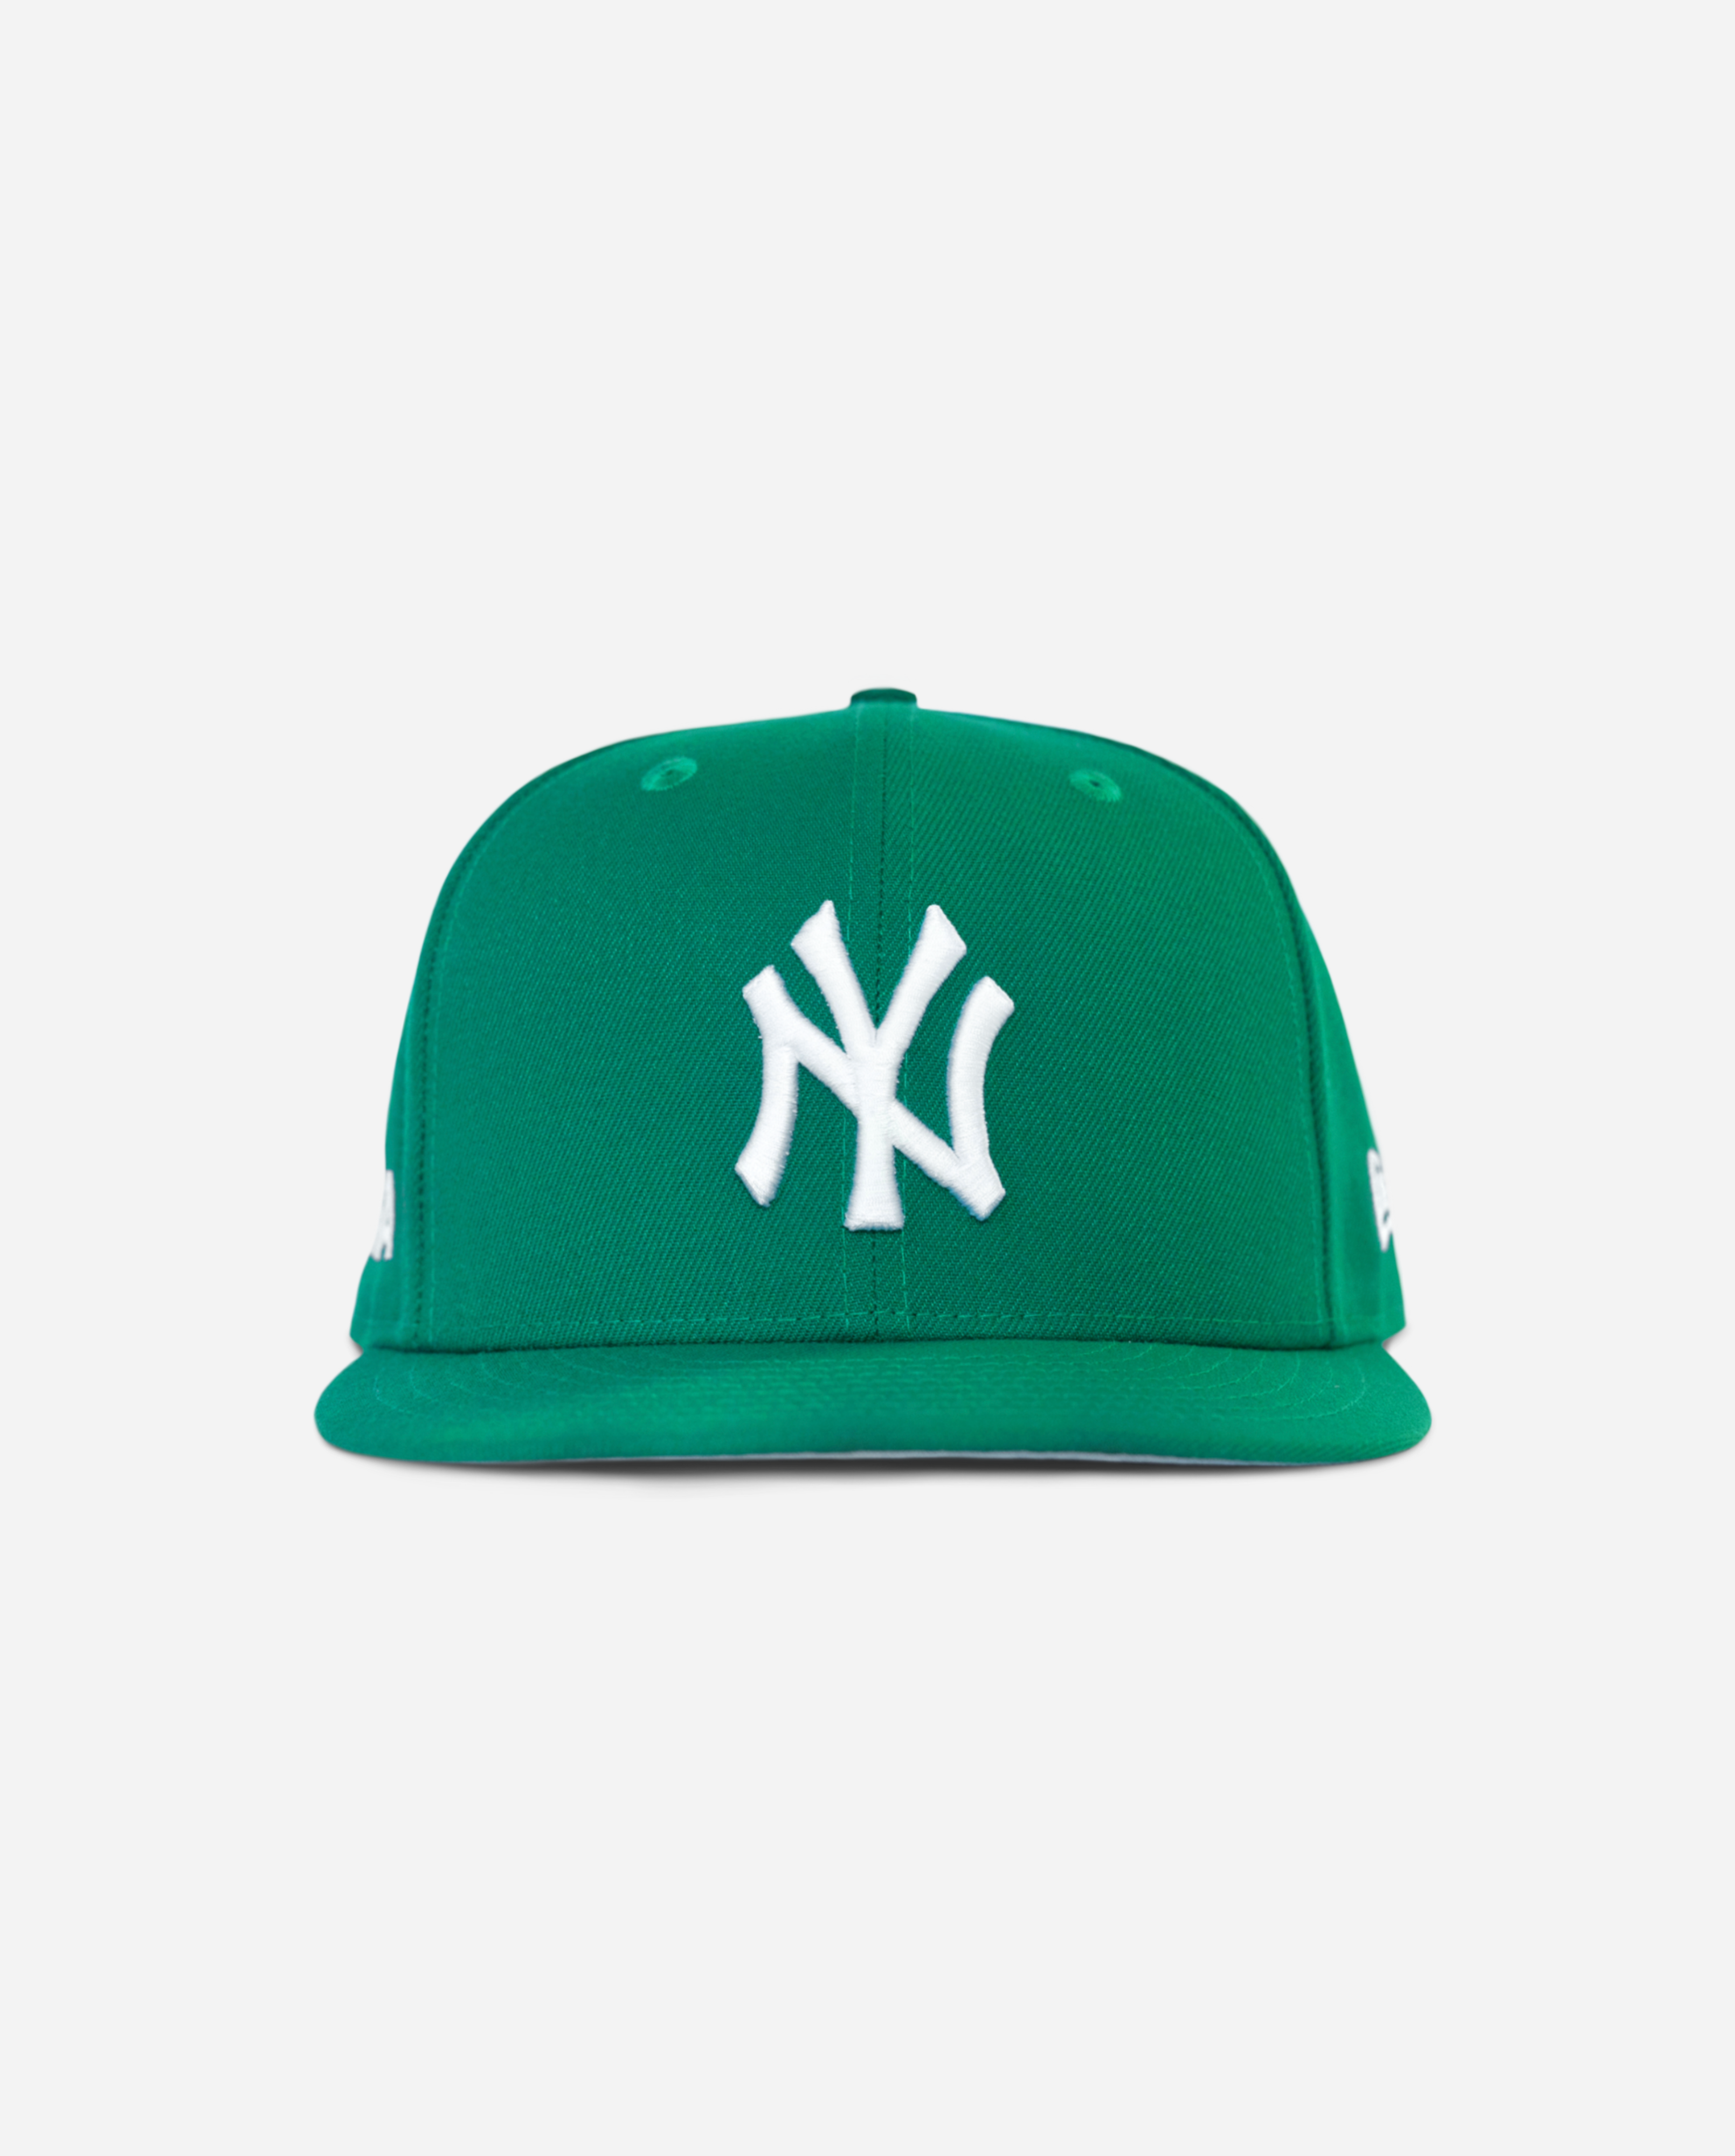 oMA KELLY GREEN NEW YORK YANKEES FITTED HAT (SAMPLE)